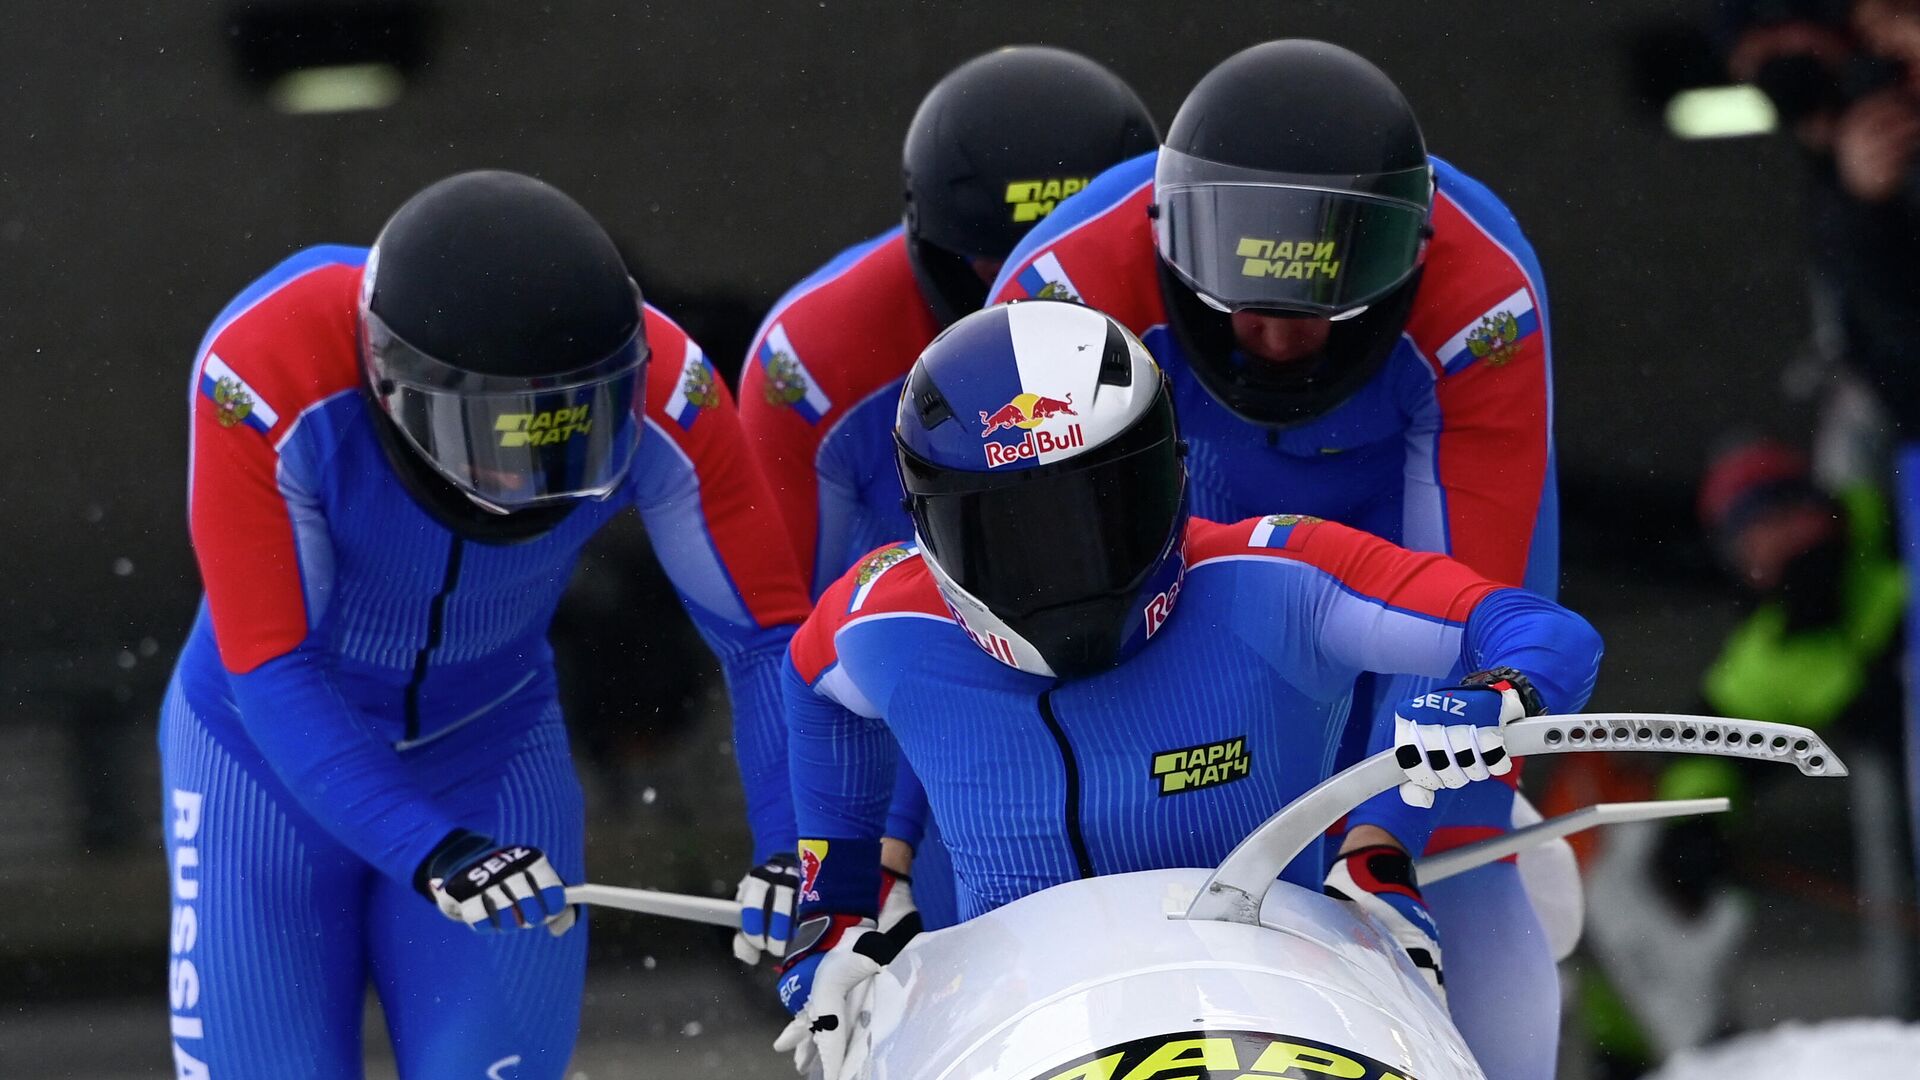 Russia's Rostislav Gaitiukevich, Mikhail Mordasov, Pavel Travkin and Aleksei Laptev take the start of the 4-man bobsleigh race of the IBSF Bob & Skeleton World Cup in Winterberg, western Germany on January 9, 2022. (Photo by Ina FASSBENDER / AFP) - РИА Новости, 1920, 16.01.2022